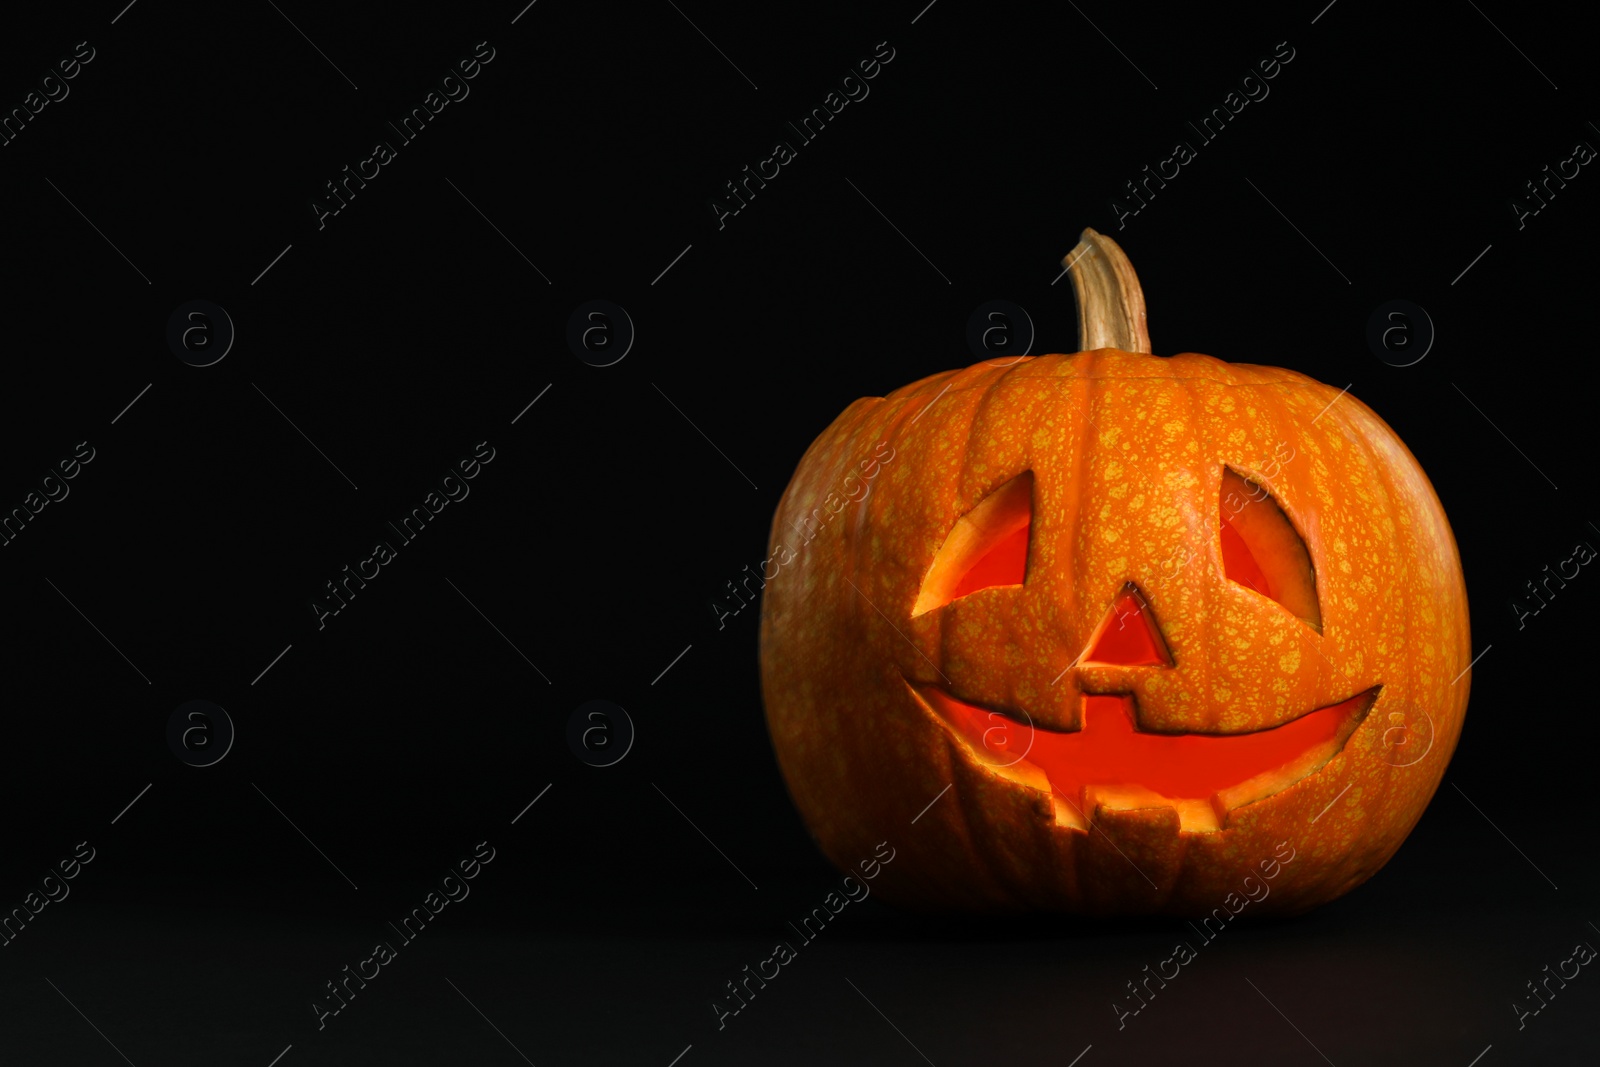 Photo of Pumpkin head on black background, space for text. Jack lantern - traditional Halloween decor